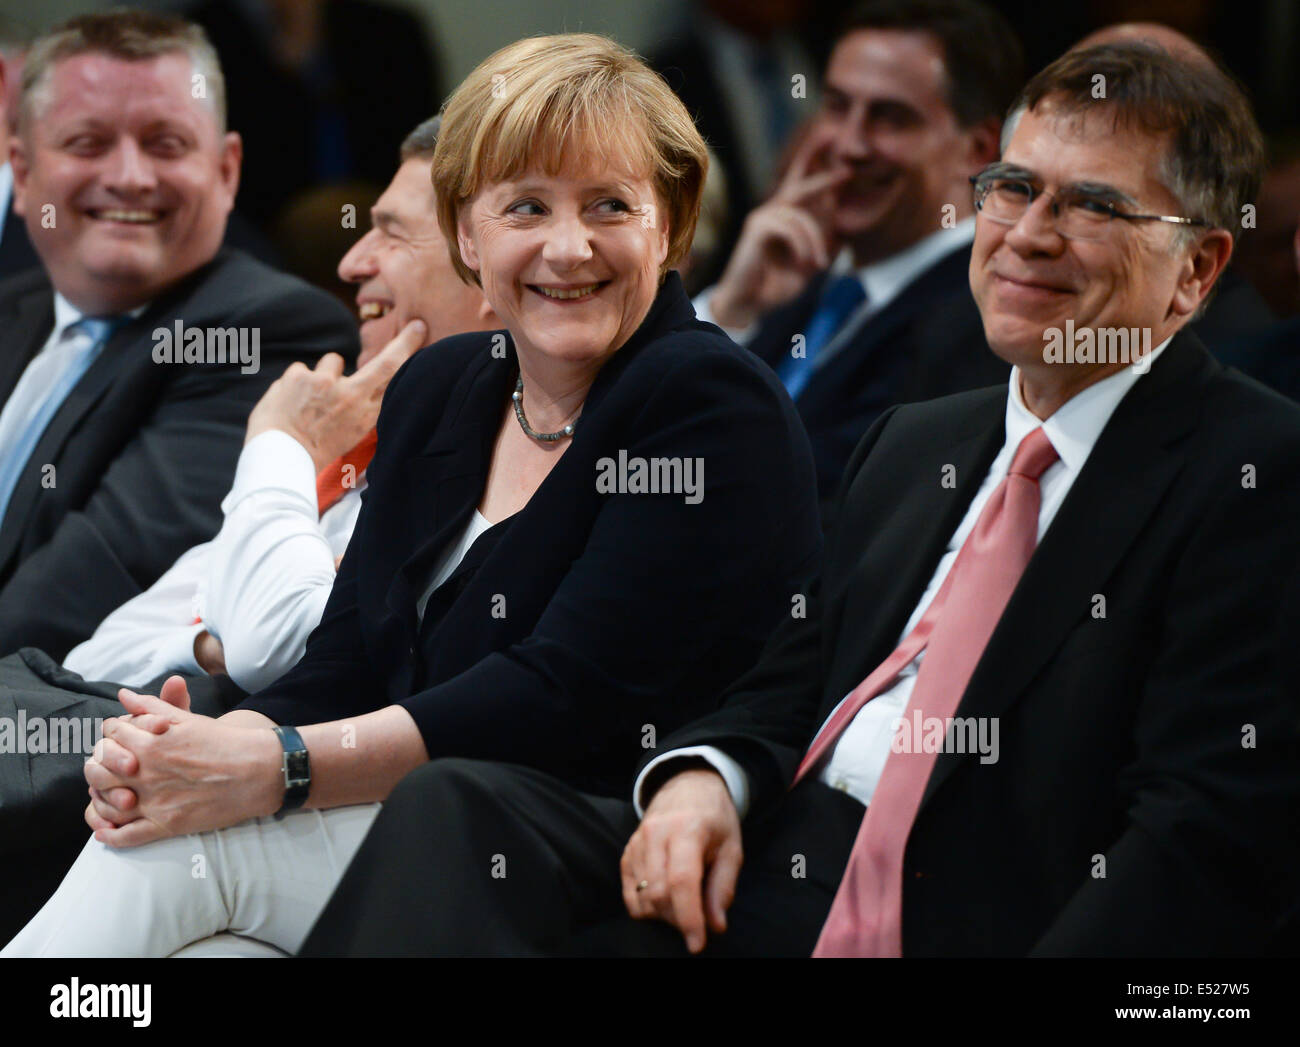 German Chancellor Angela Merkel smiles next to German Health Minister Hermann Groehe (L-R), her husband Joachim Sauer and historian Juergen Osterhammel during the party for her 60th birthday in Berlin, Germany, 17 July 2014. Around 1,000 guests were invited to the event at Konrad-Adenauer-Haus in Berlin. Photo: SOEREN STACHE/dpa Stock Photo